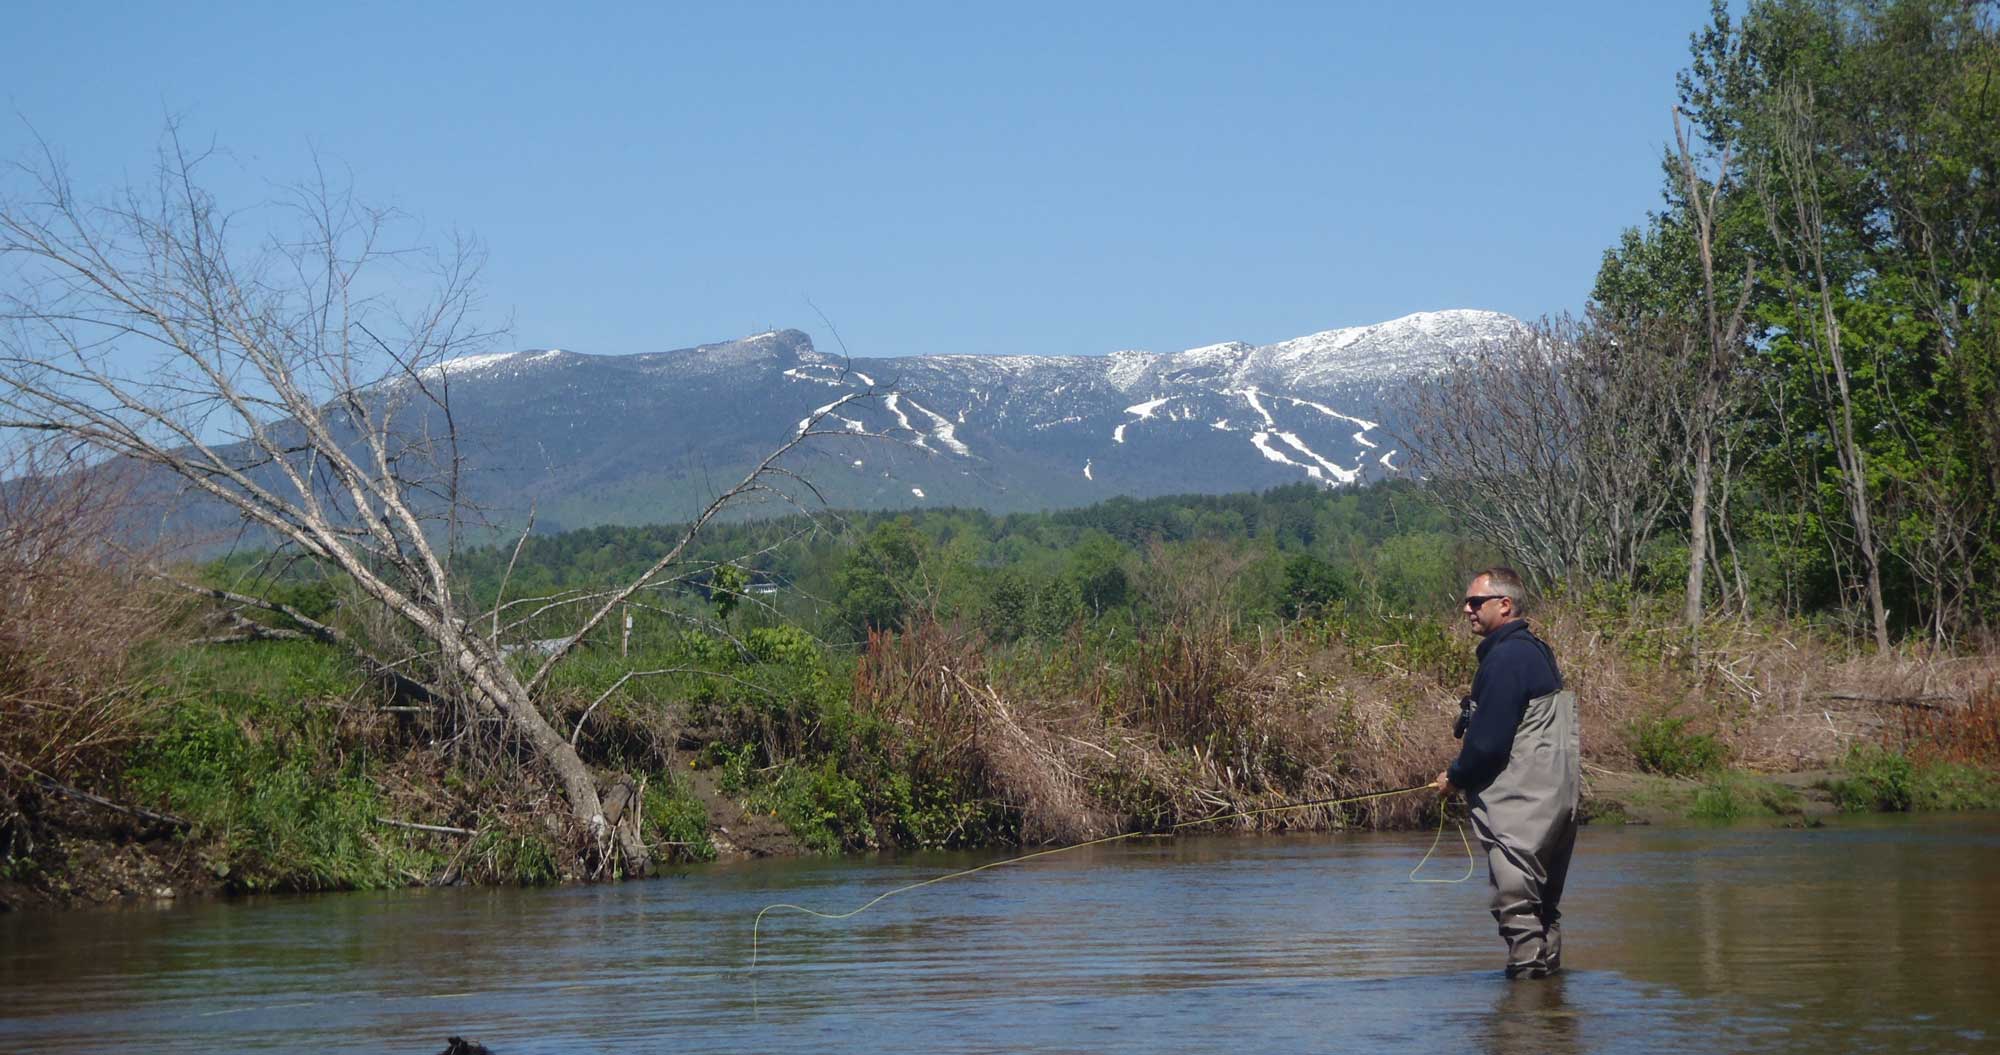 Instructional fishing tours in Stowe Vermont